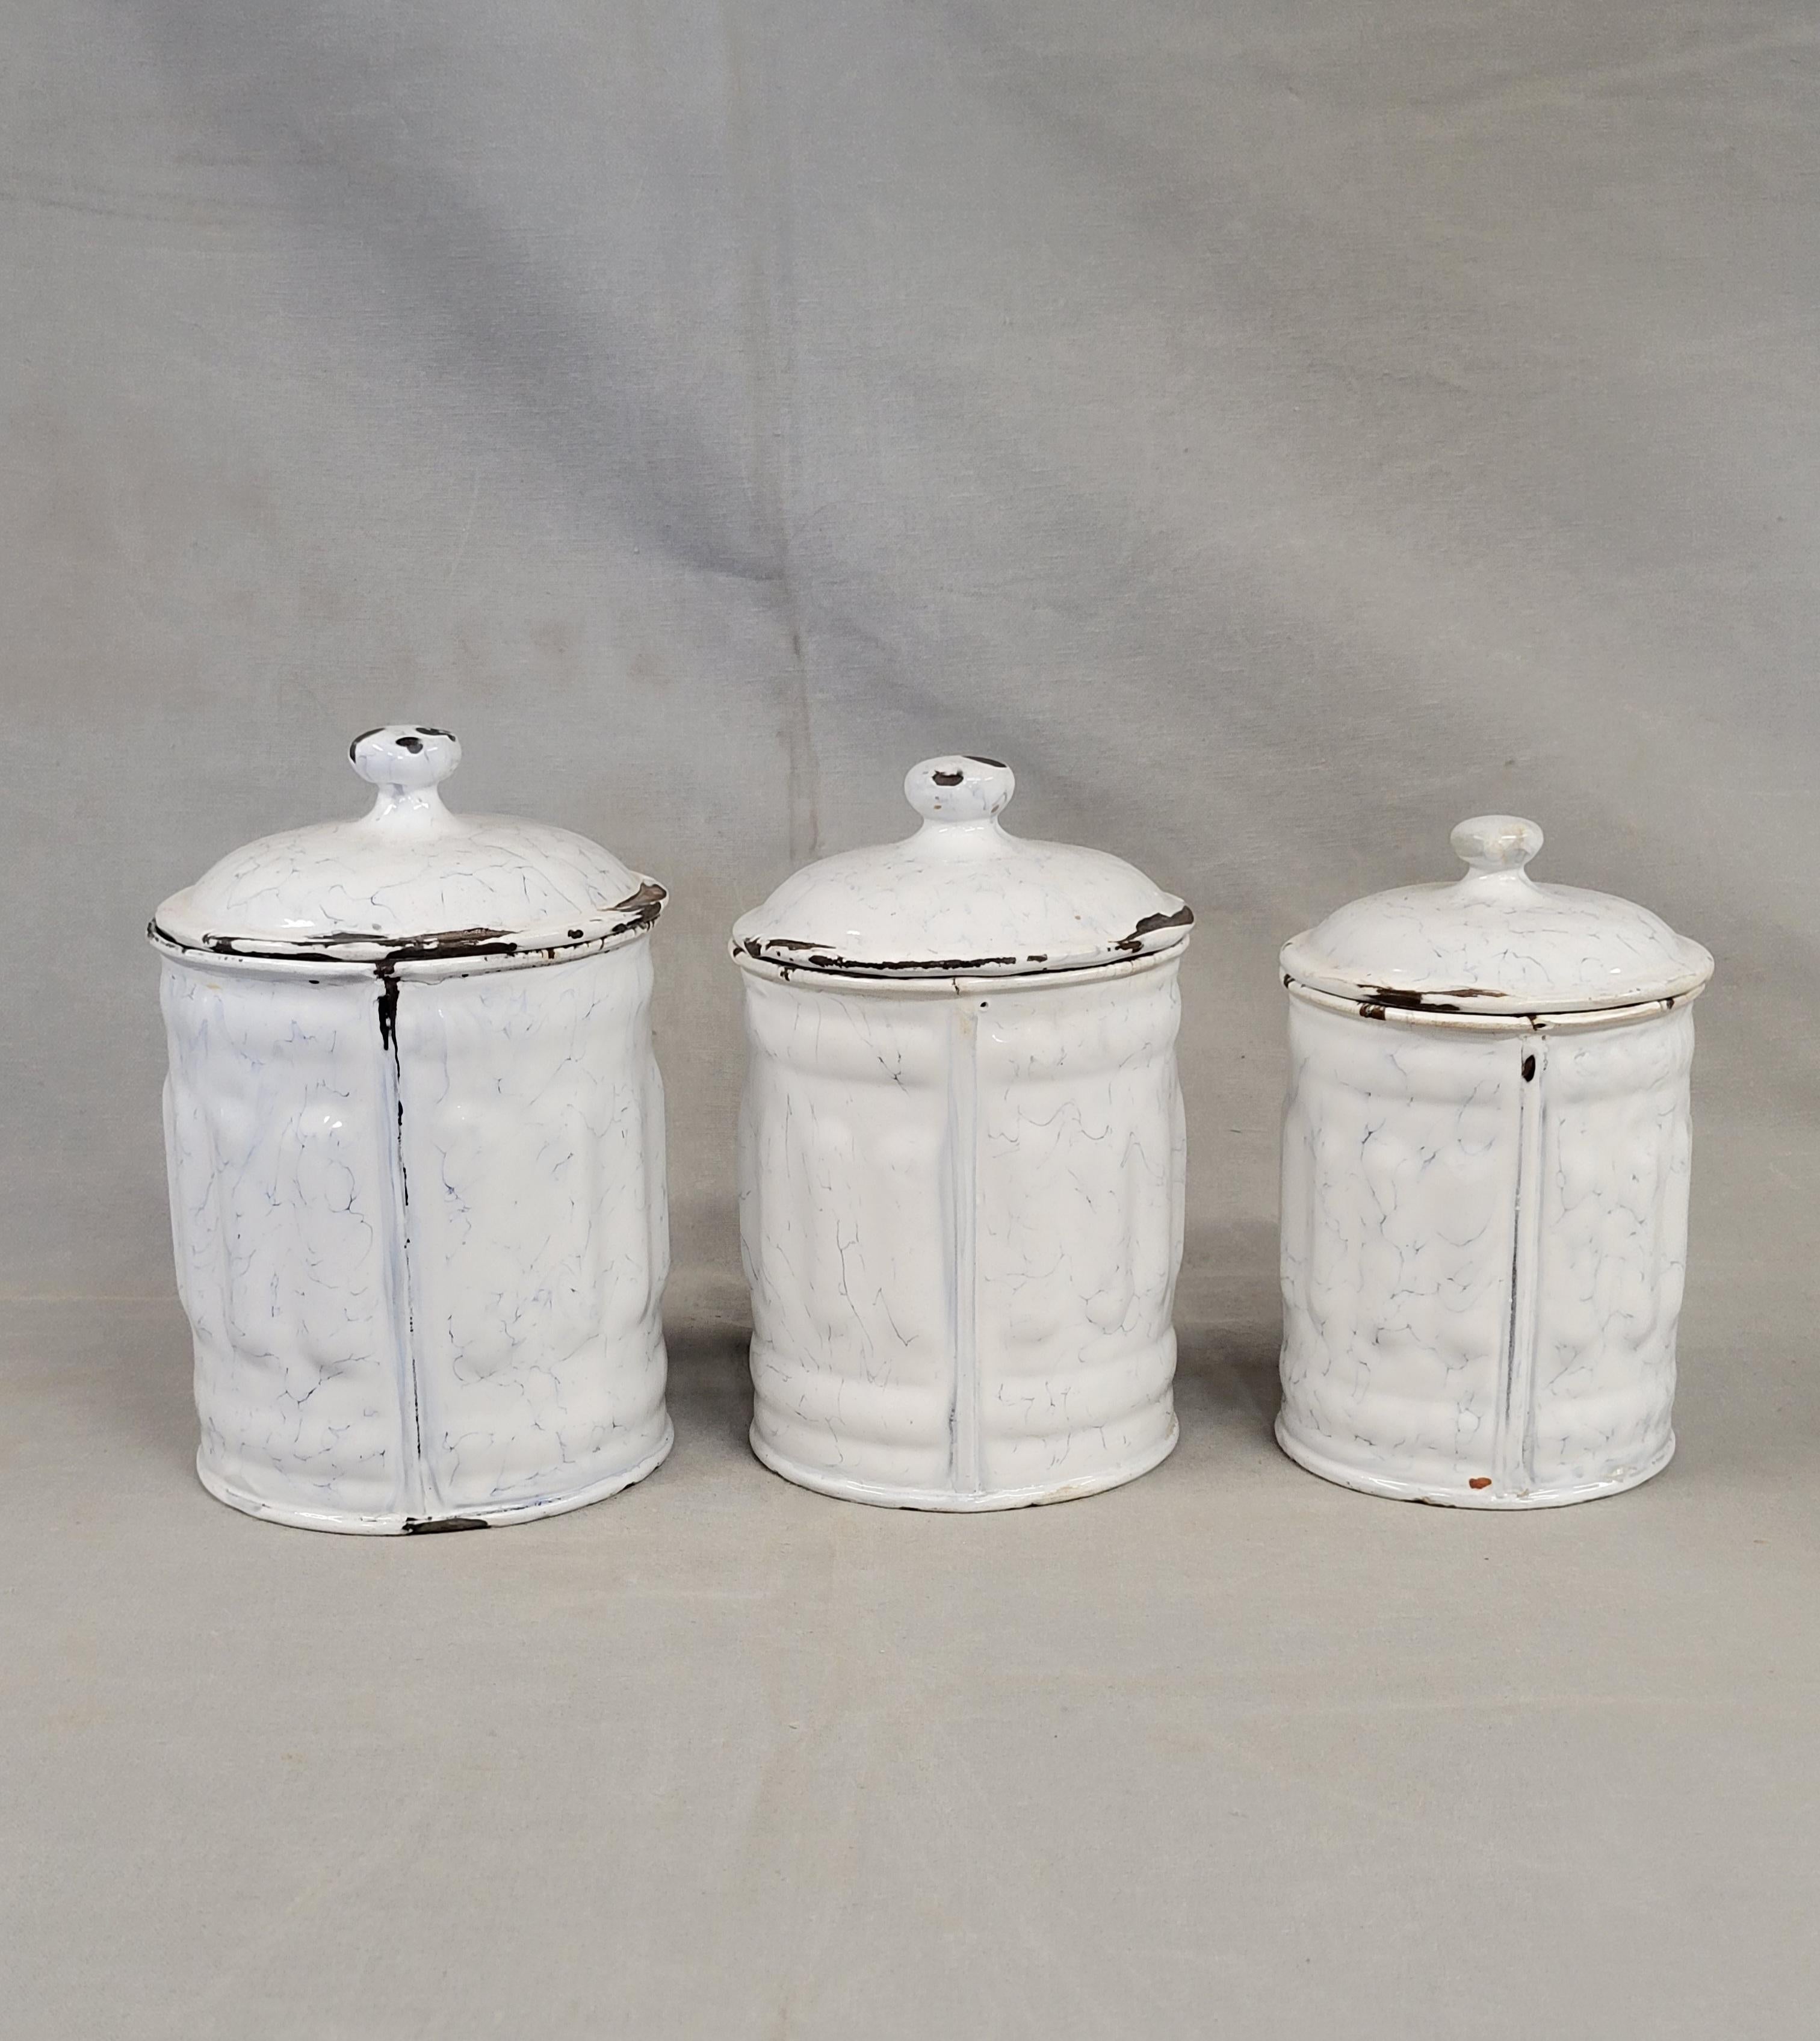 Antique French White and Blue Enamel Canister Set - 6 Pieces For Sale 7